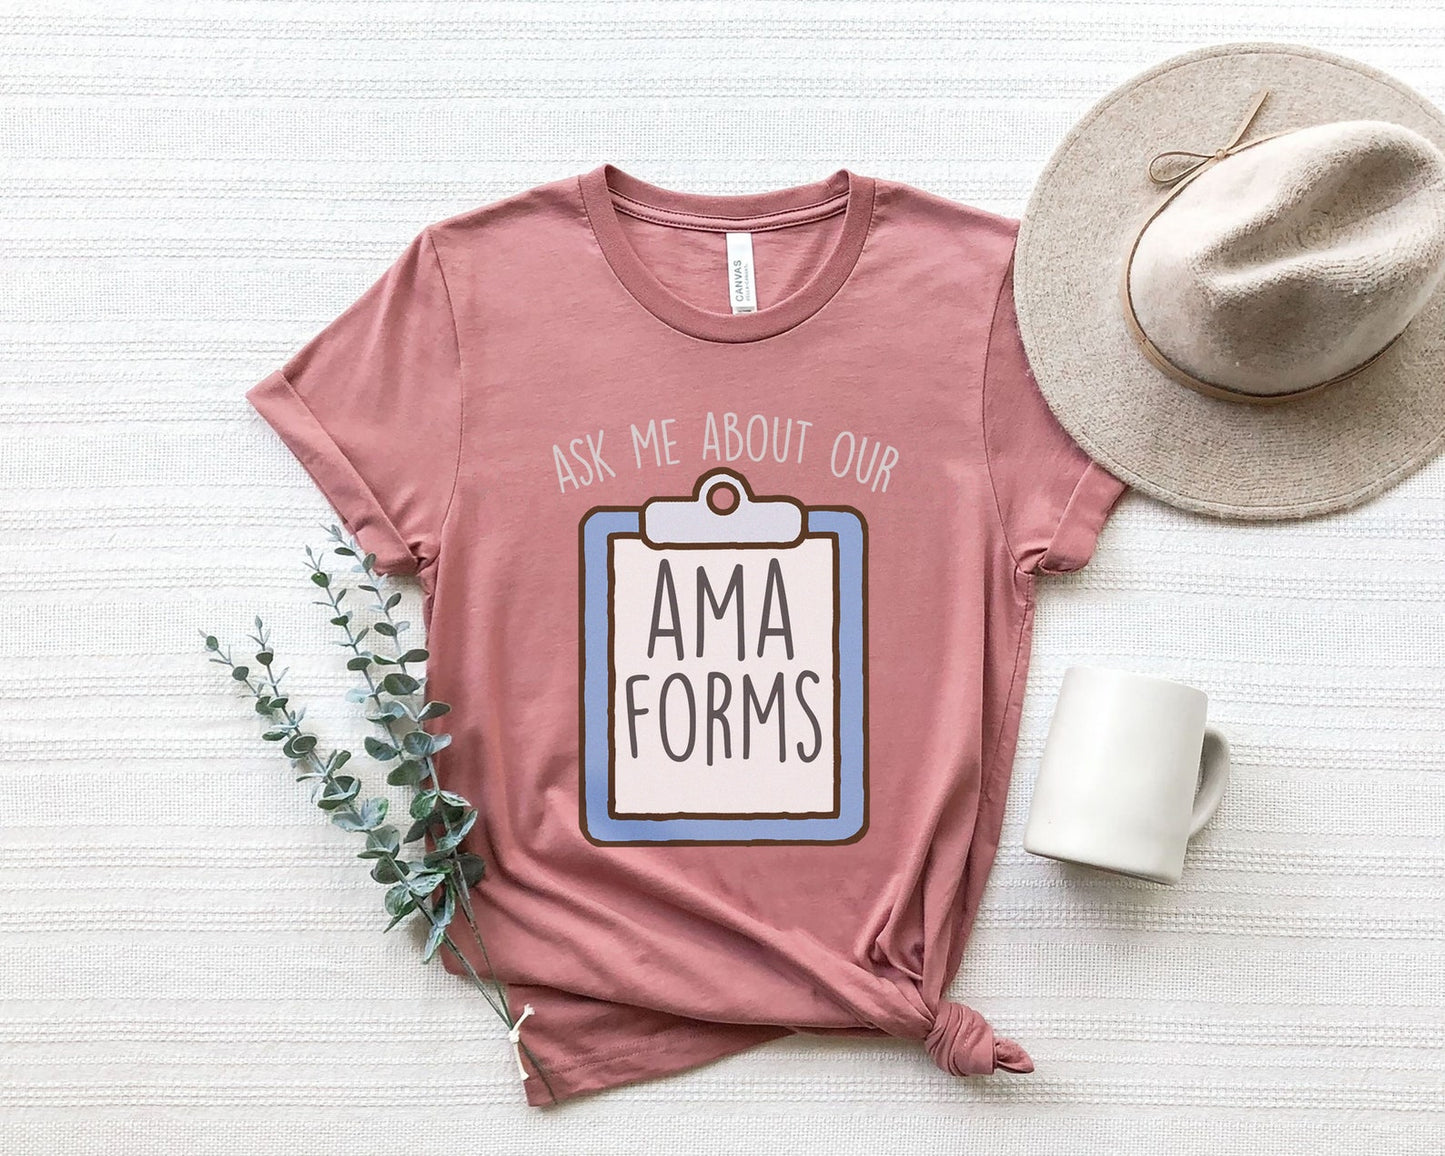 Ask Me About Our AMA Forms T-Shirt